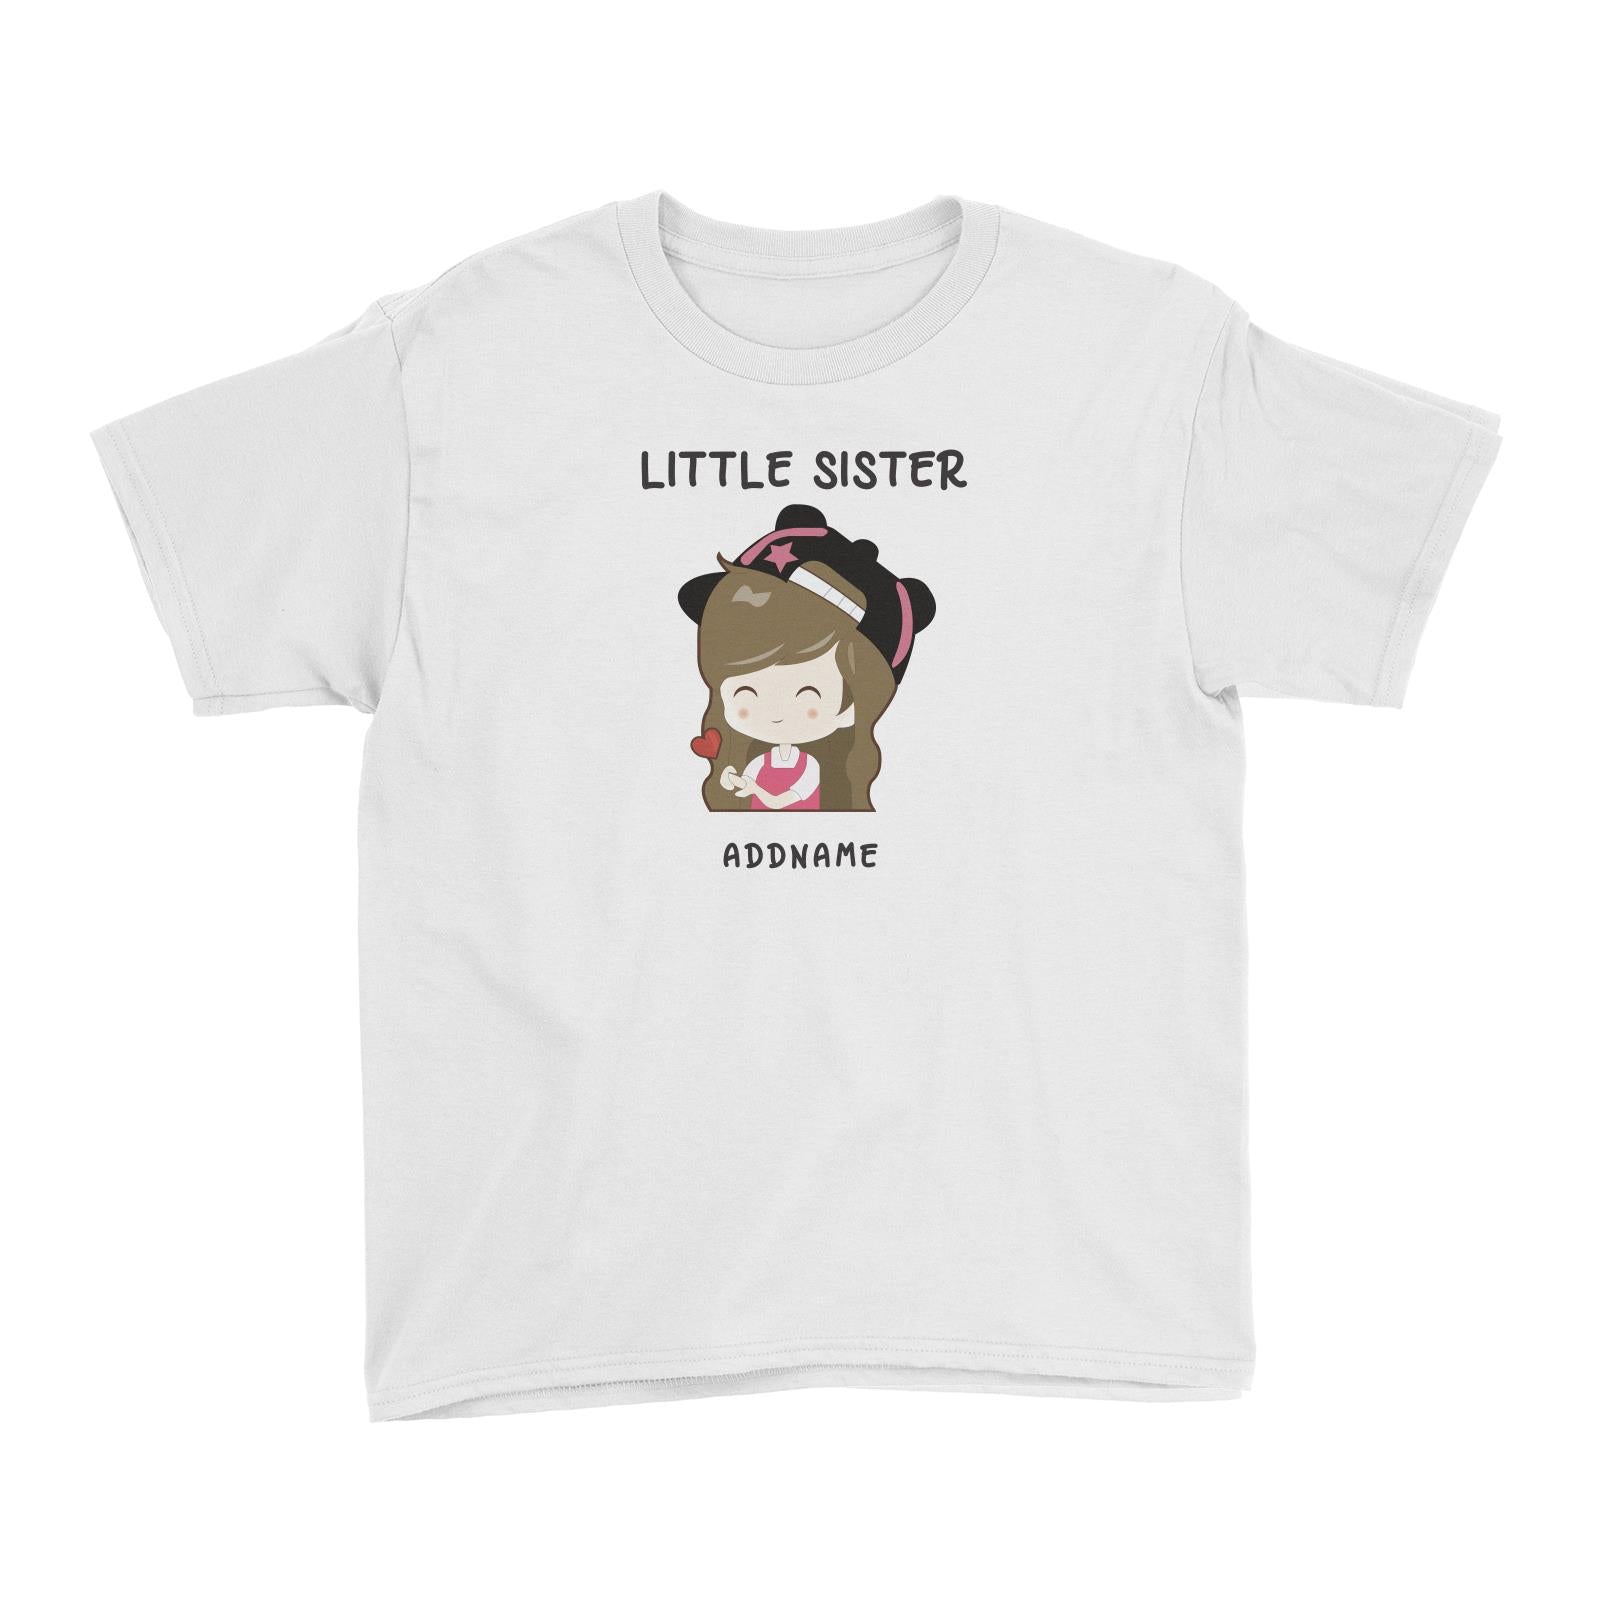 My Lovely Family Series Little Sister Addname Kid's T-Shirt (FLASH DEAL)